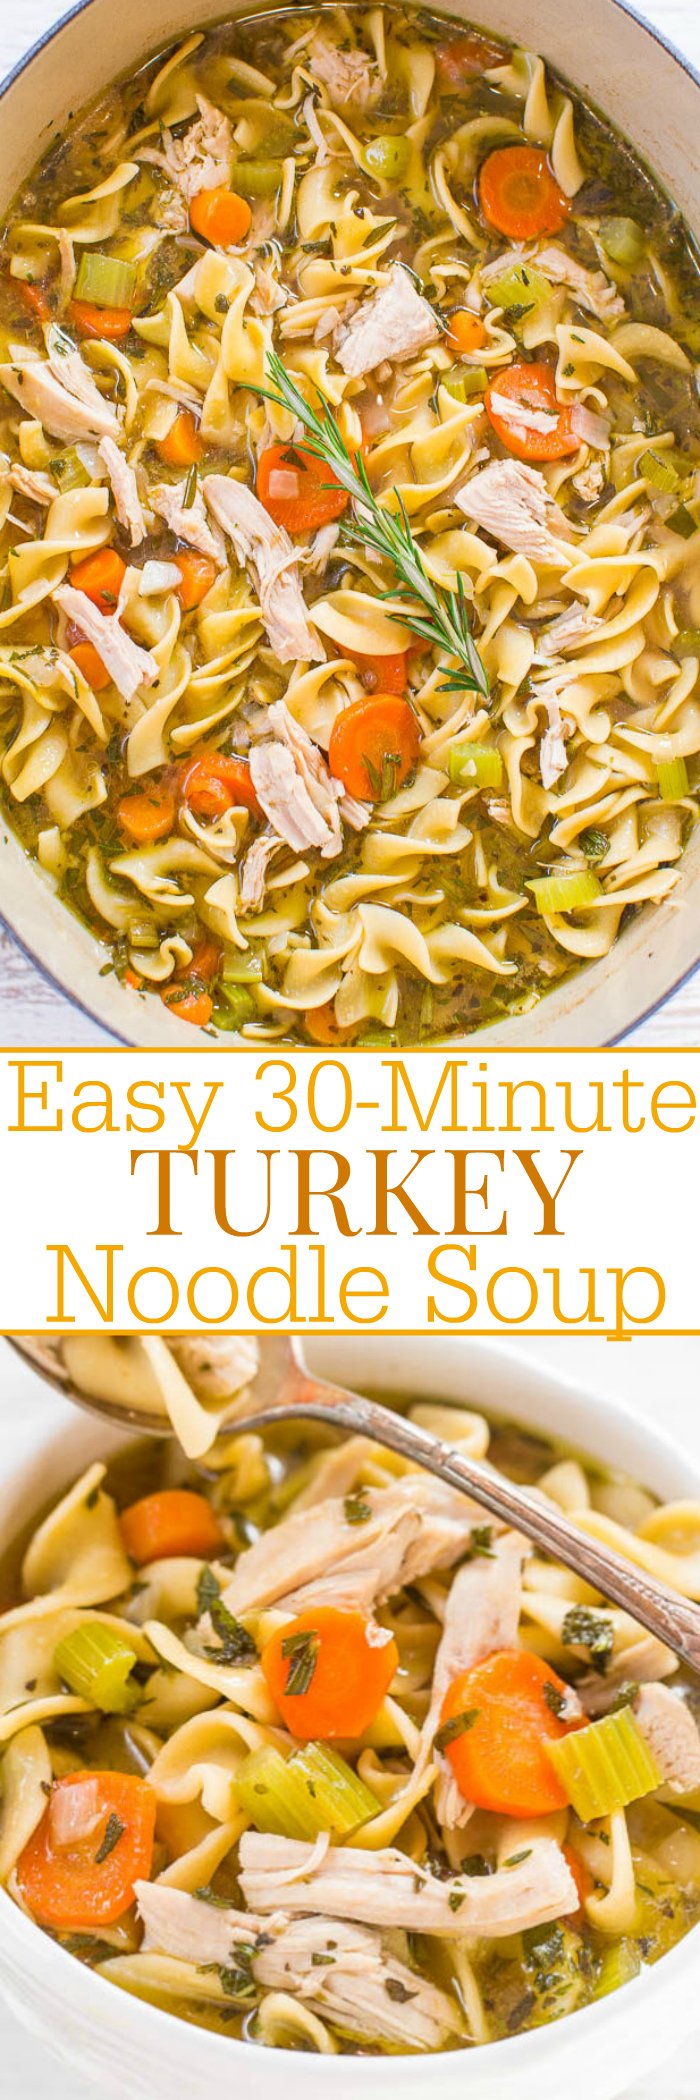 Easy 30-Minute Turkey Noodle Soup - Have leftover Thanksgiving turkey? MAKE THIS!! It's fast, easy, hearty, loaded with flavor, and tastes like grandma's homemade chicken noodle soup, but with turkey!! 